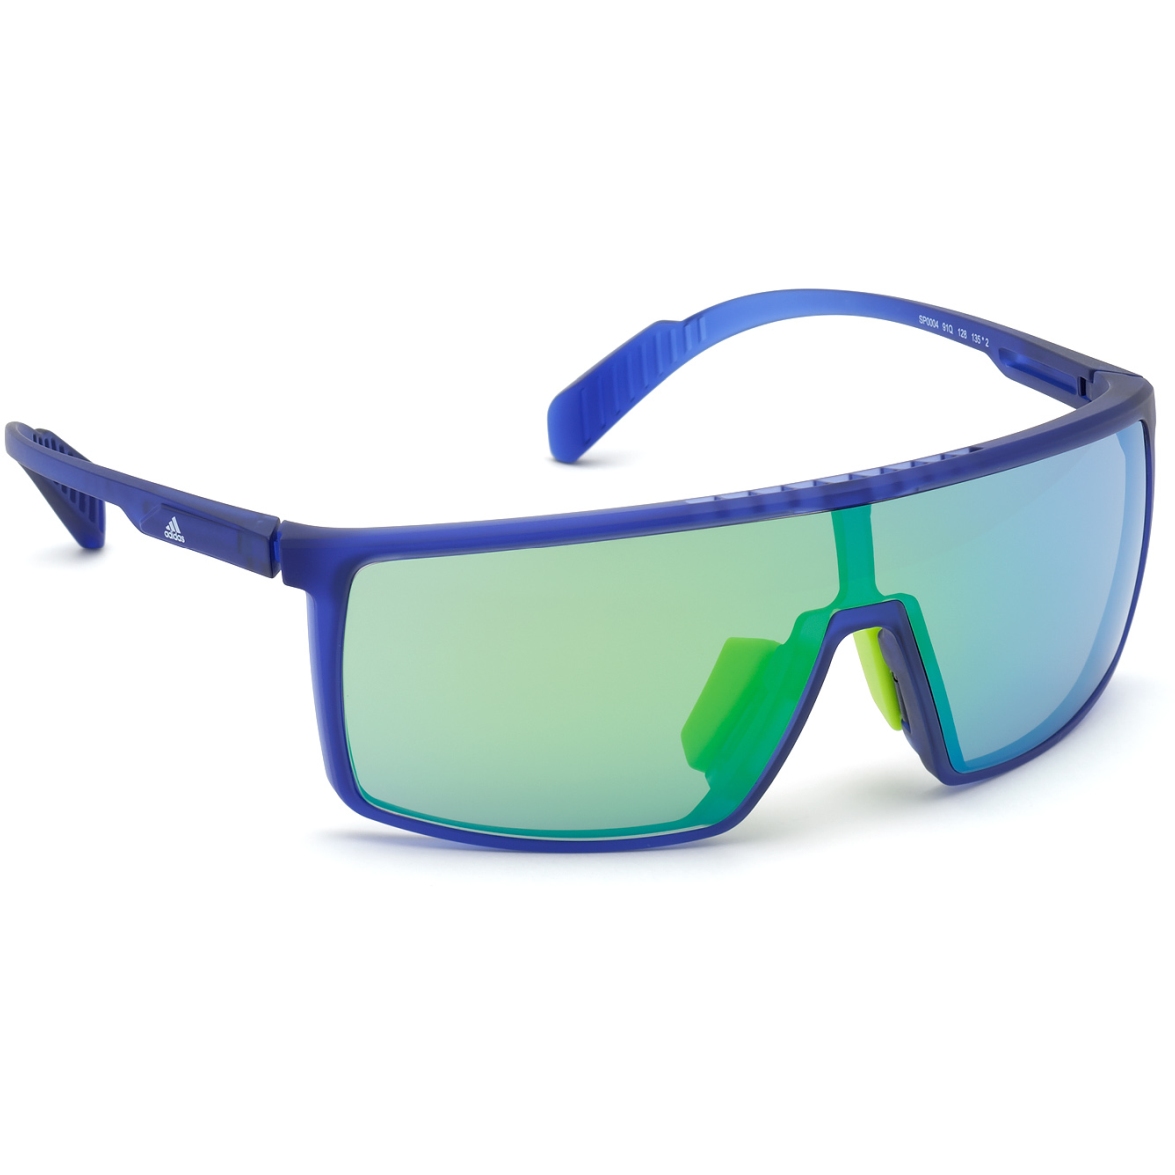 Produktbild von adidas Sp0004 Injected Sportsonnenbrille - Frosted Electric Blue / Contrast Mirror Green